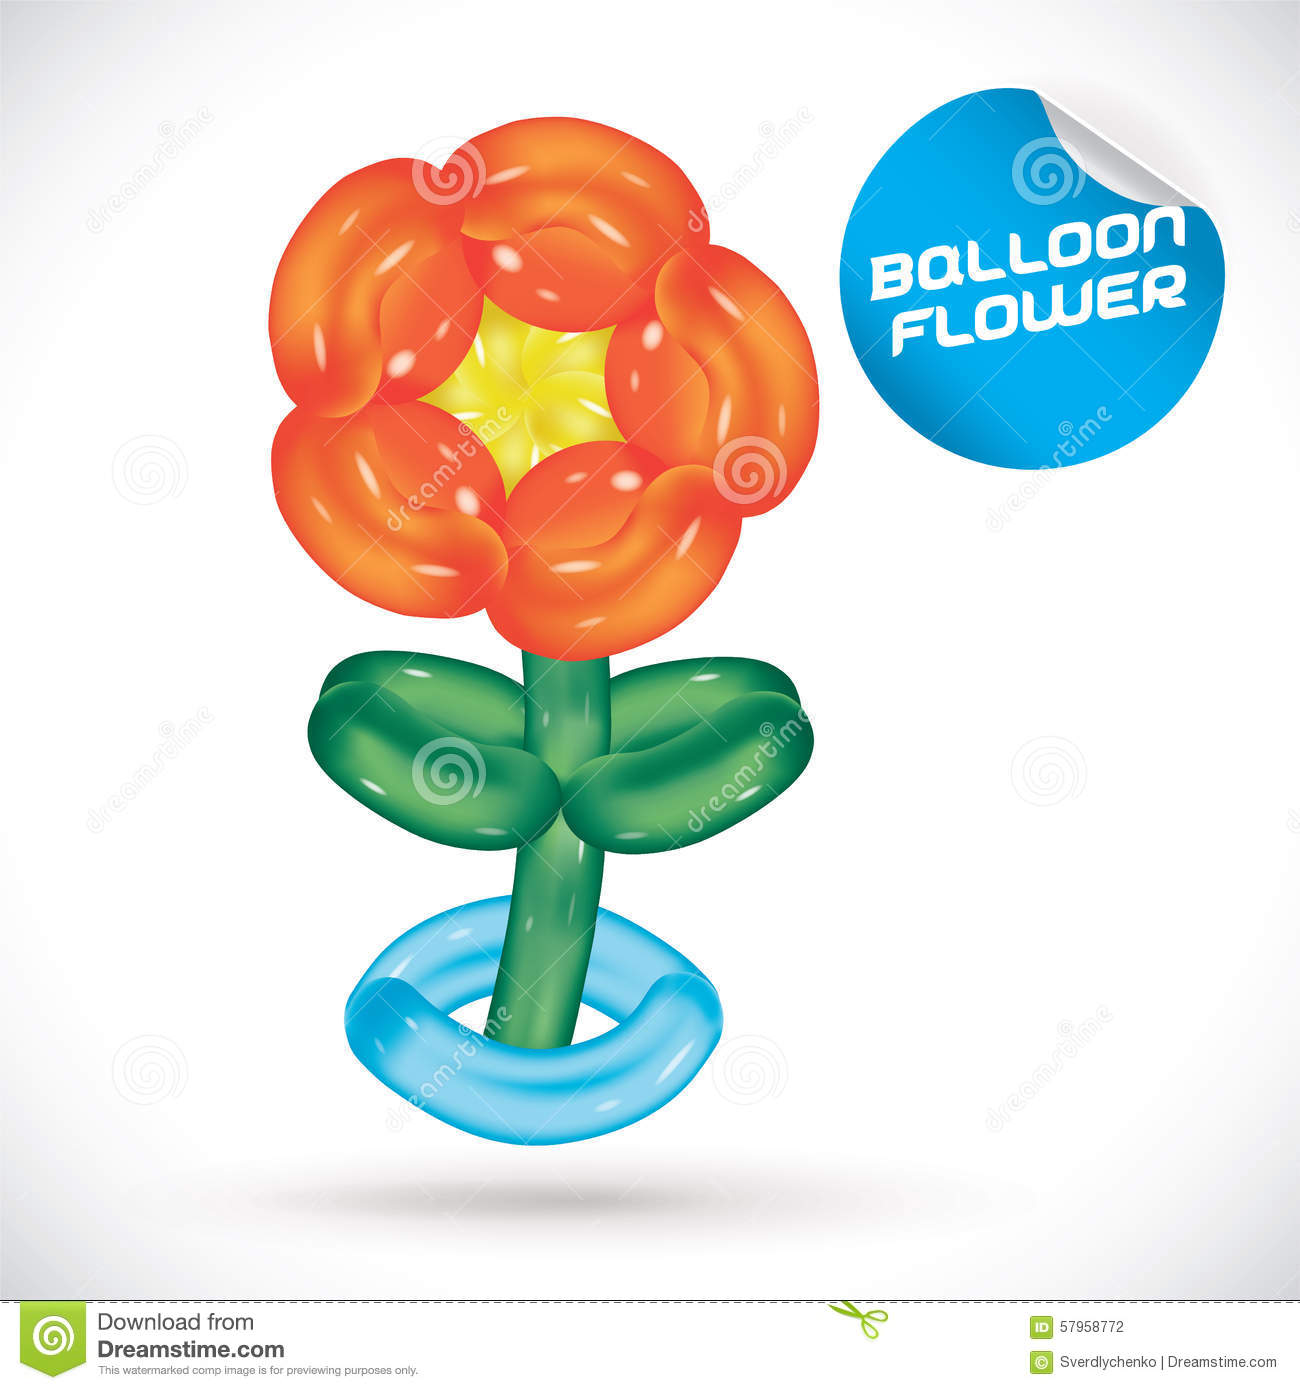 clip art balloons and flowers - photo #23